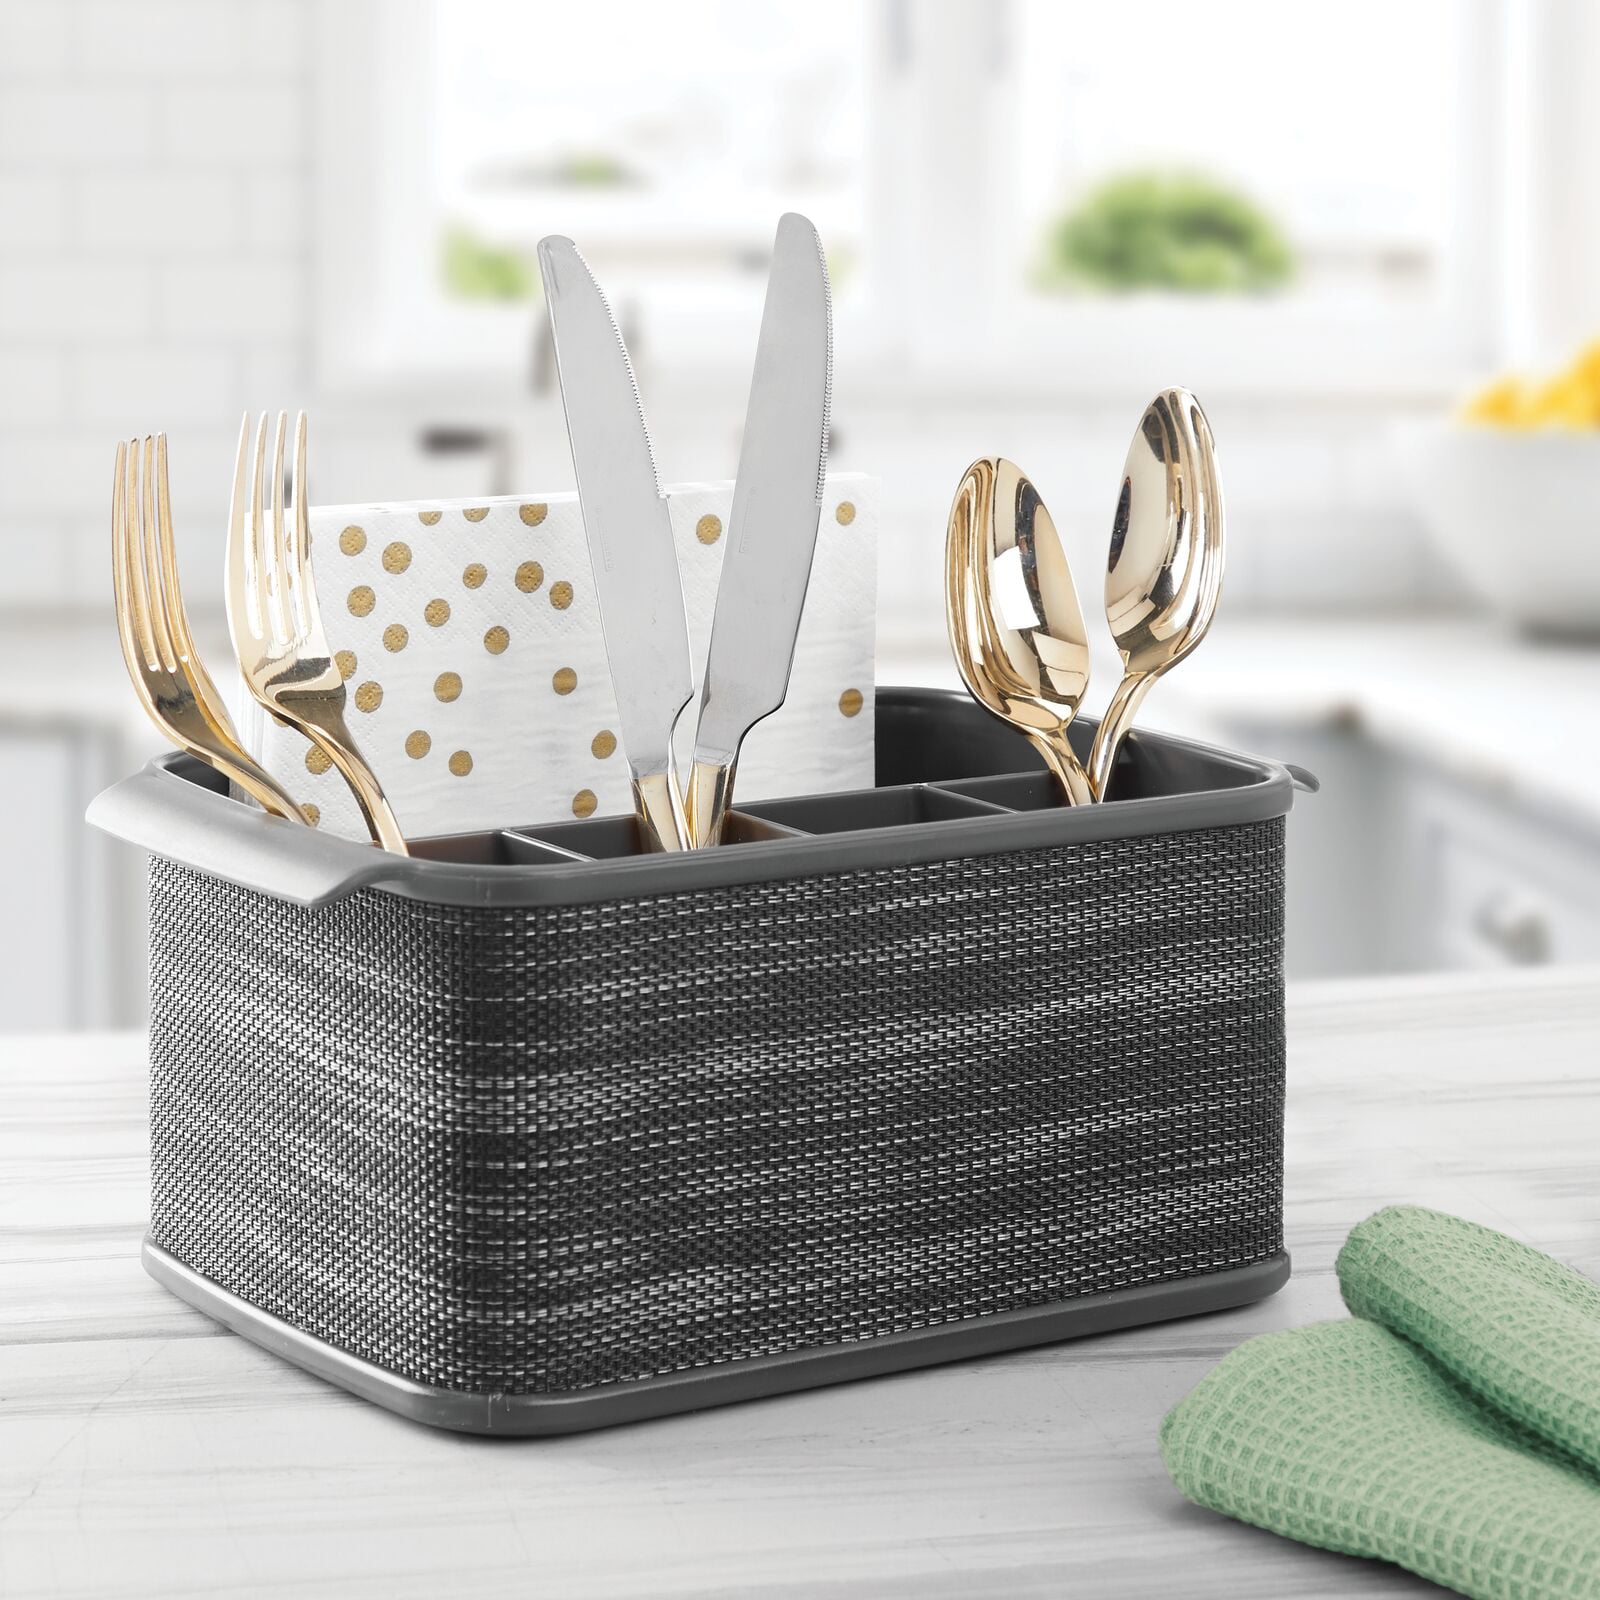 Knives Napkins Holds Forks Spoons Woven Accent Bronze/Sand Brown Indoor or Outdoor Use mDesign Plastic Cutlery Storage Organizer Caddy Tote Bin with Handles for Kitchen Cabinet or Pantry 